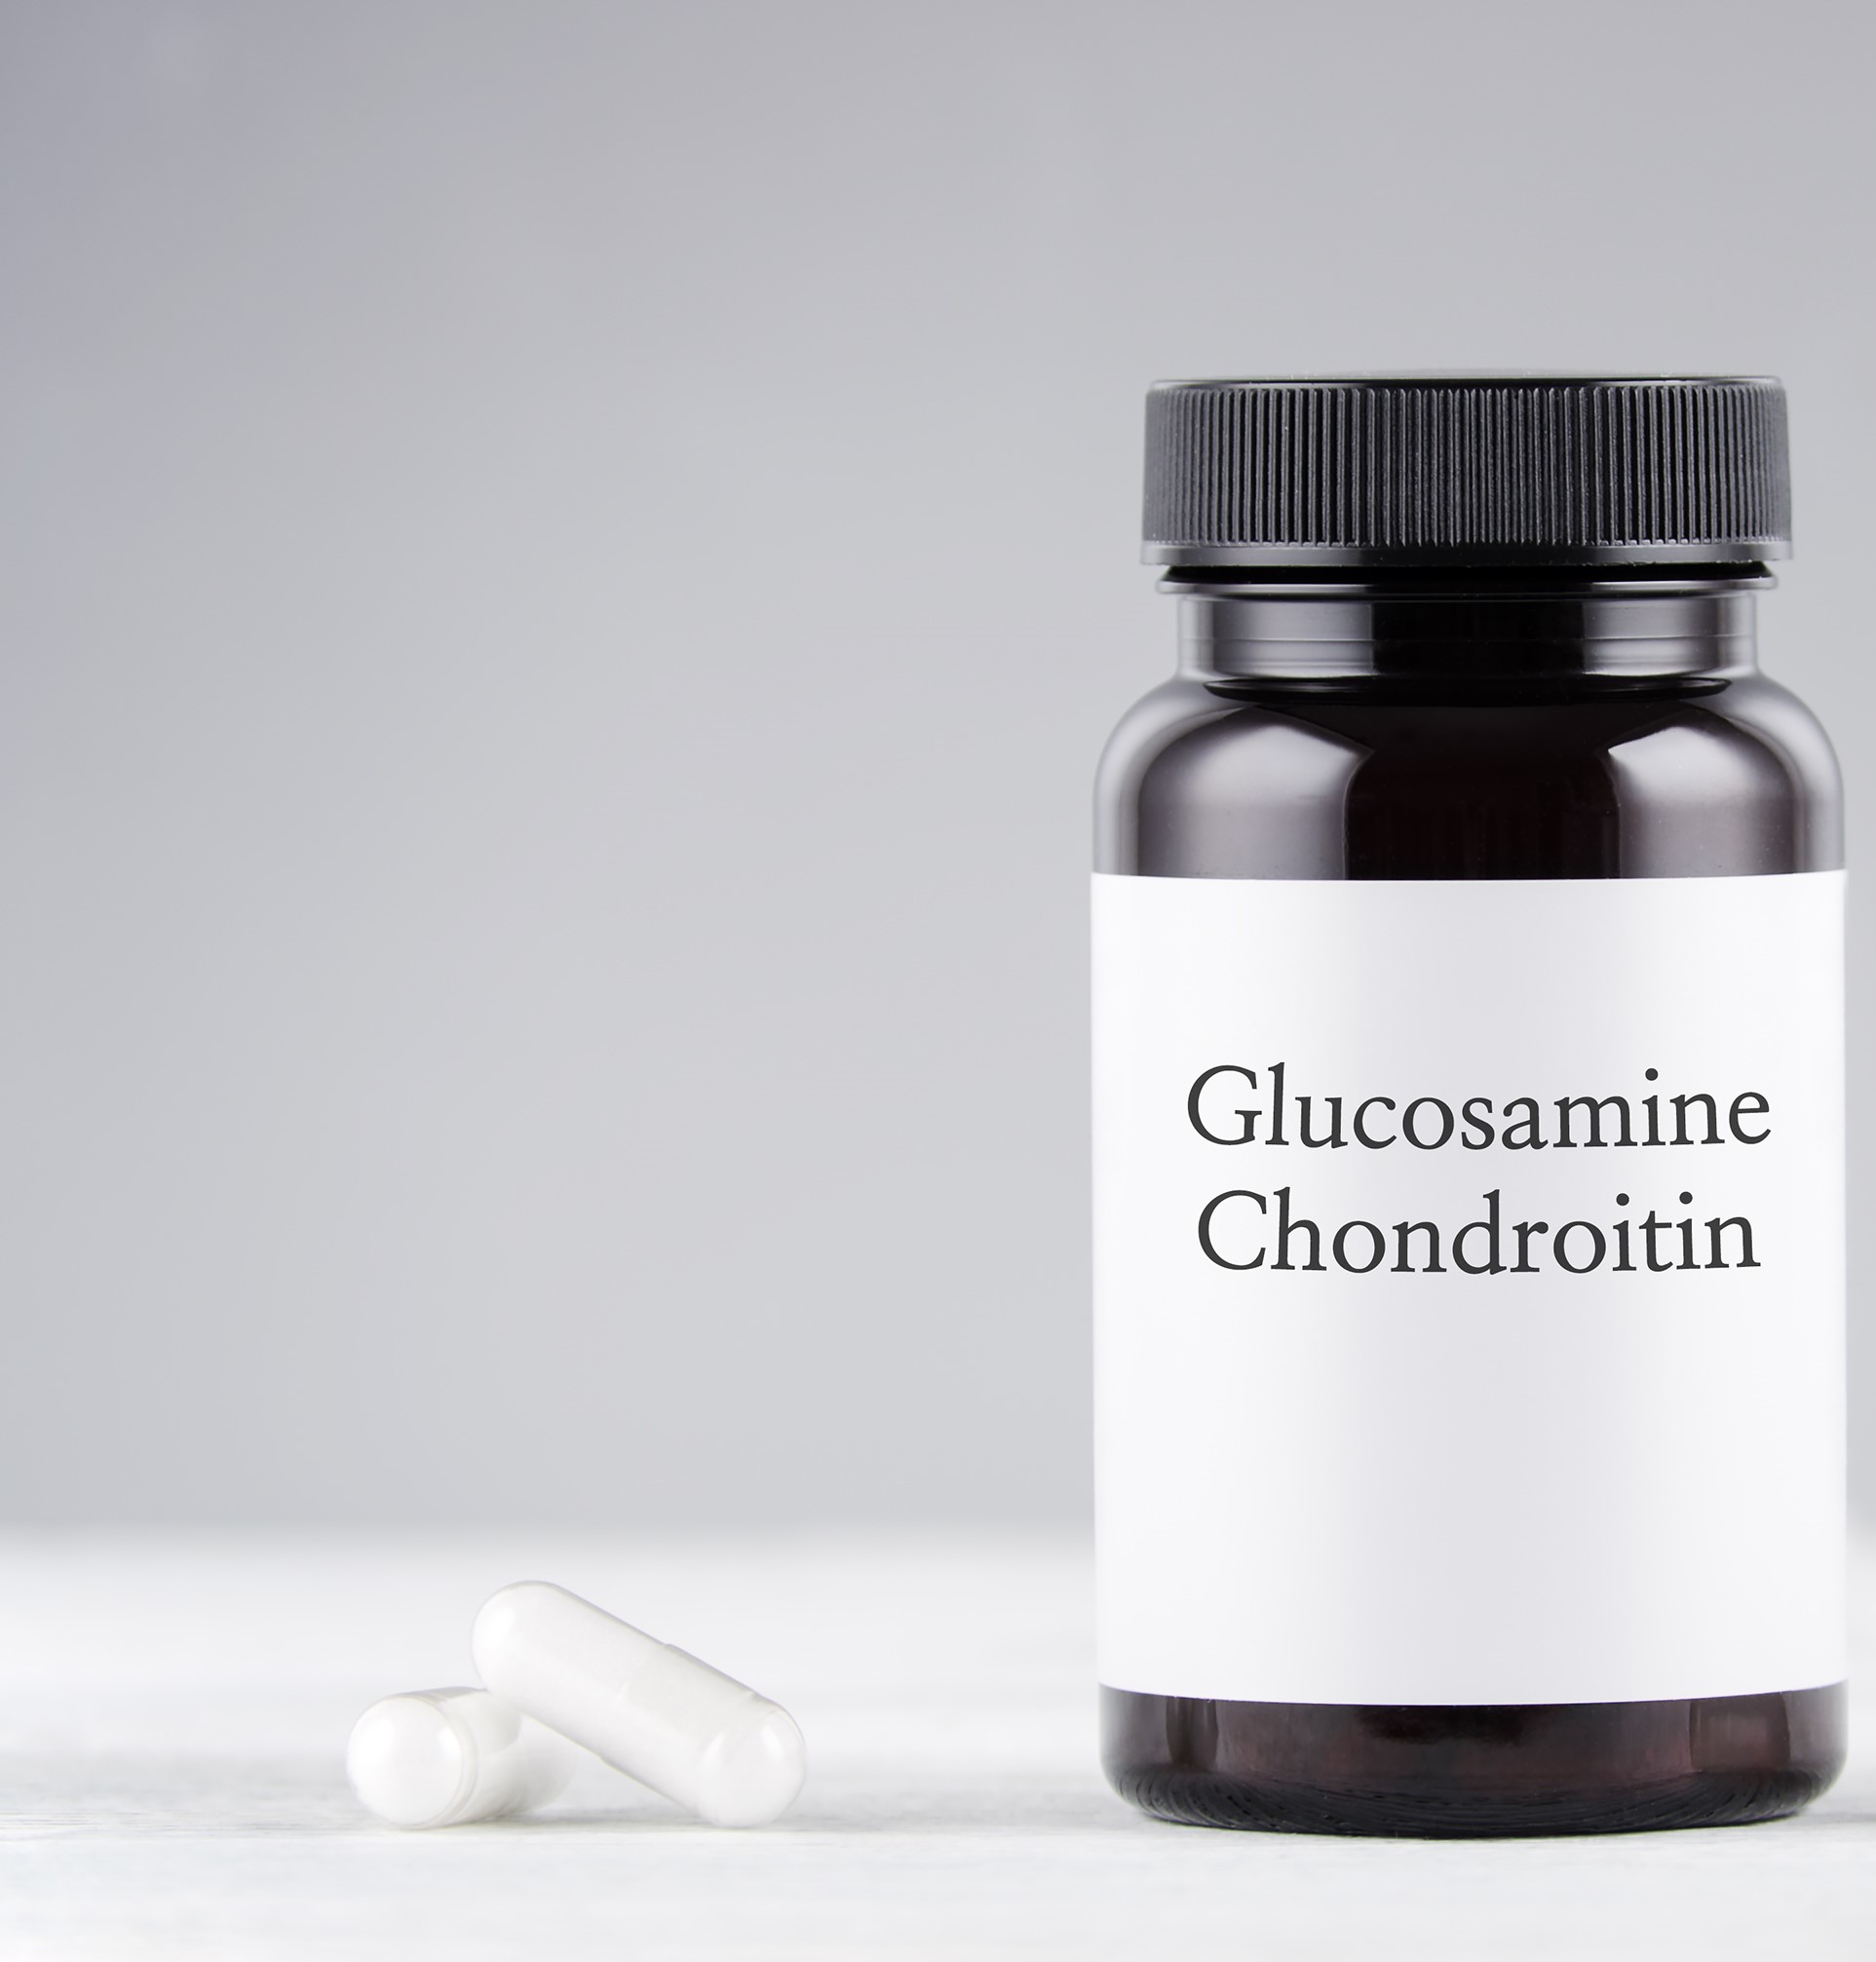 Glucosamine/Chondroitin Lower All-Cause Mortality